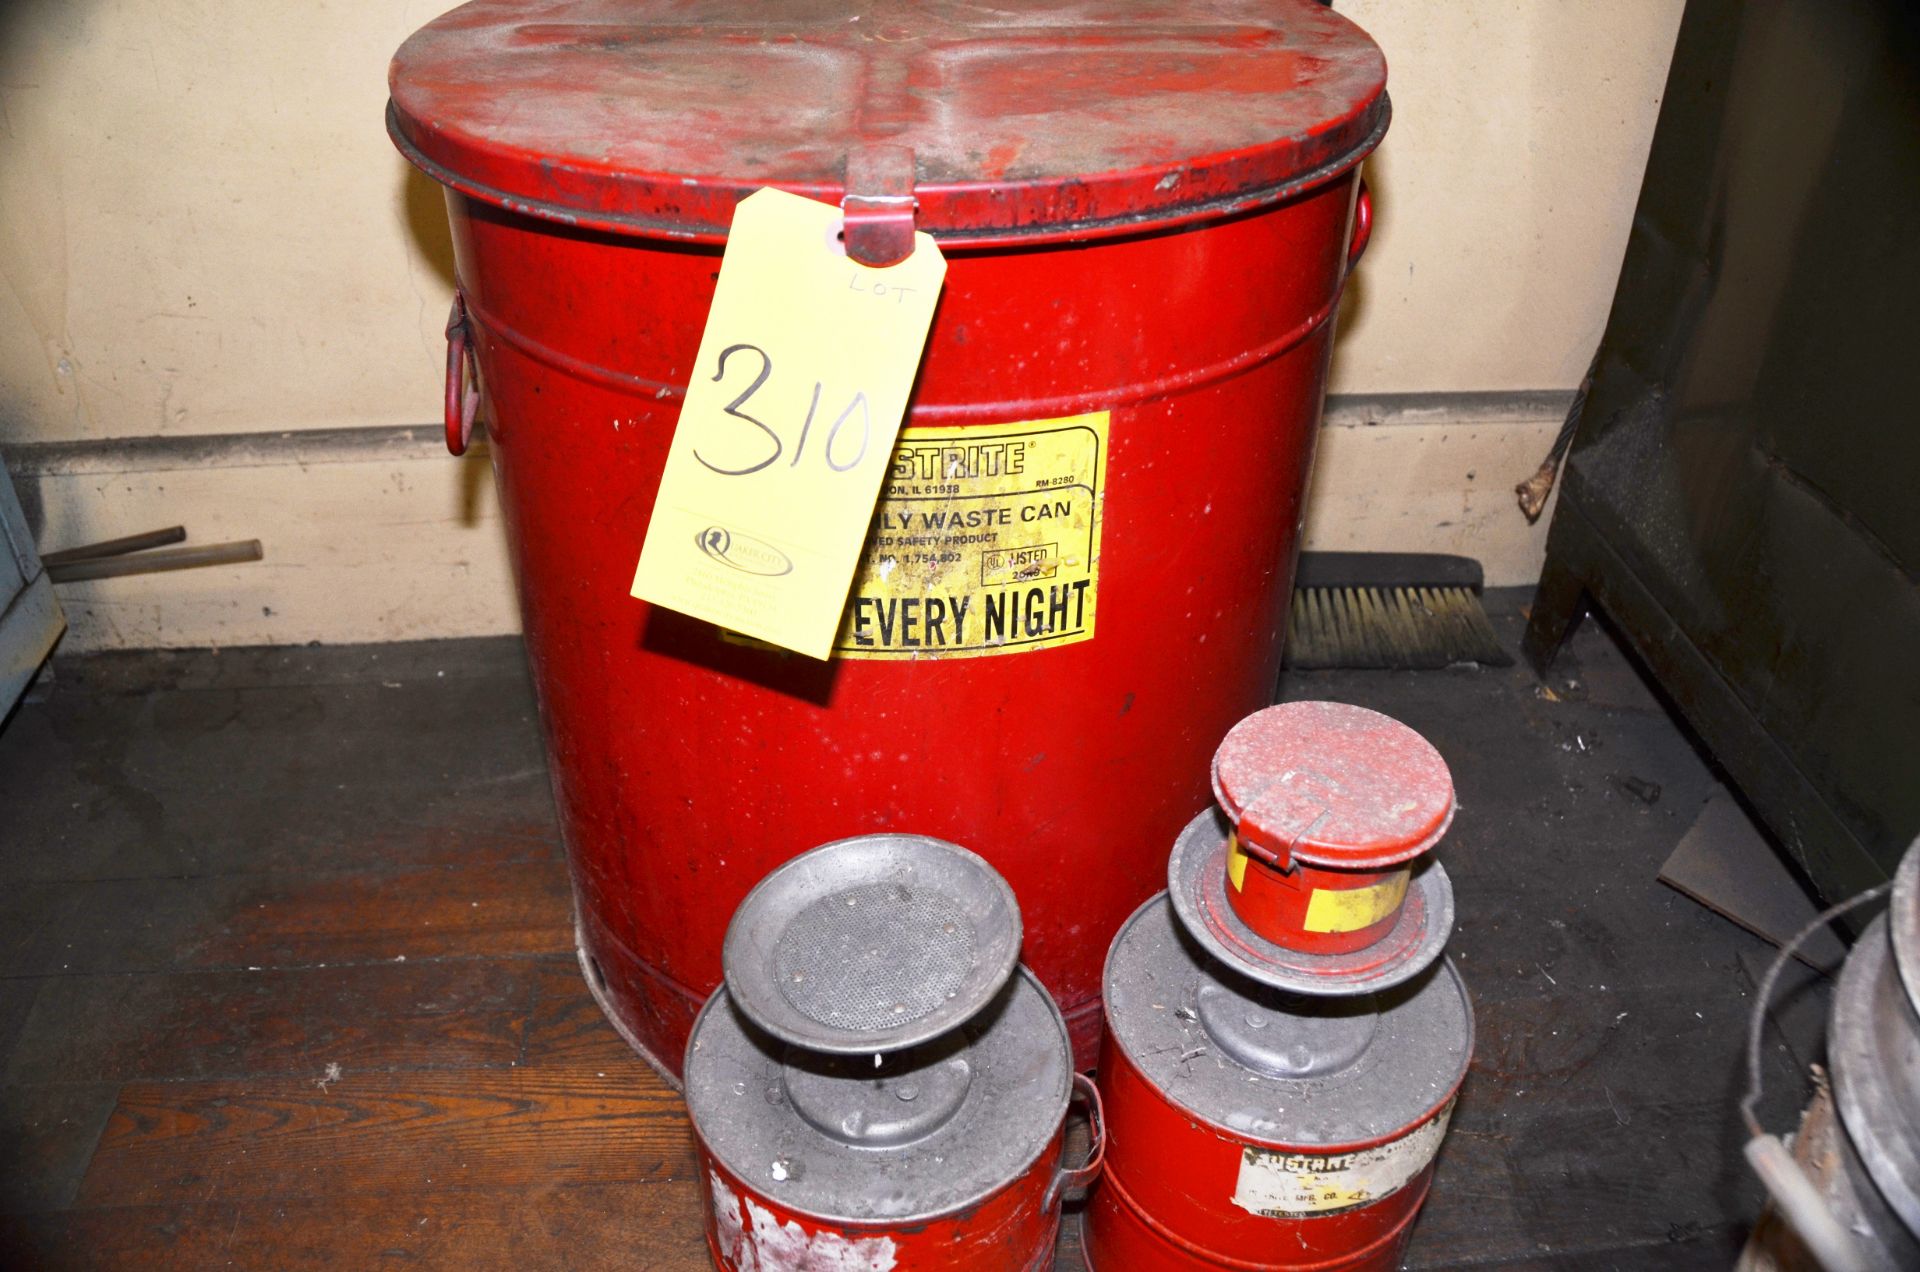 (3) JUSTRITE OIL WASTE CONTAINERS